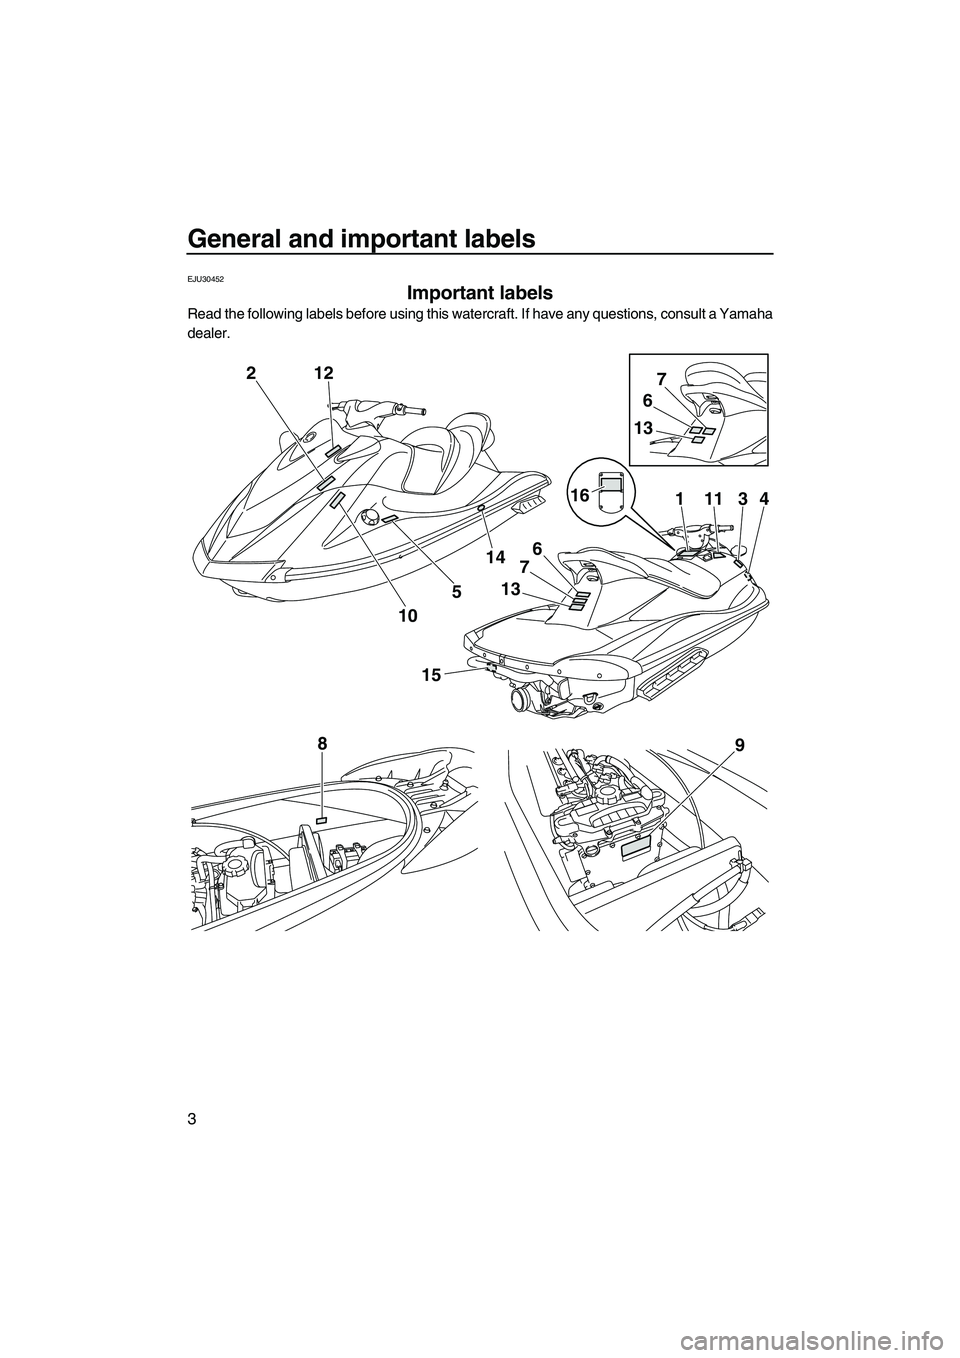 YAMAHA VX DELUXE 2010  Owners Manual General and important labels
3
EJU30452
Important labels 
Read the following labels before using this watercraft. If have any questions, consult a Yamaha
dealer.
2
15
98
13
6
7
16
6
7
13
11134
12
10
5